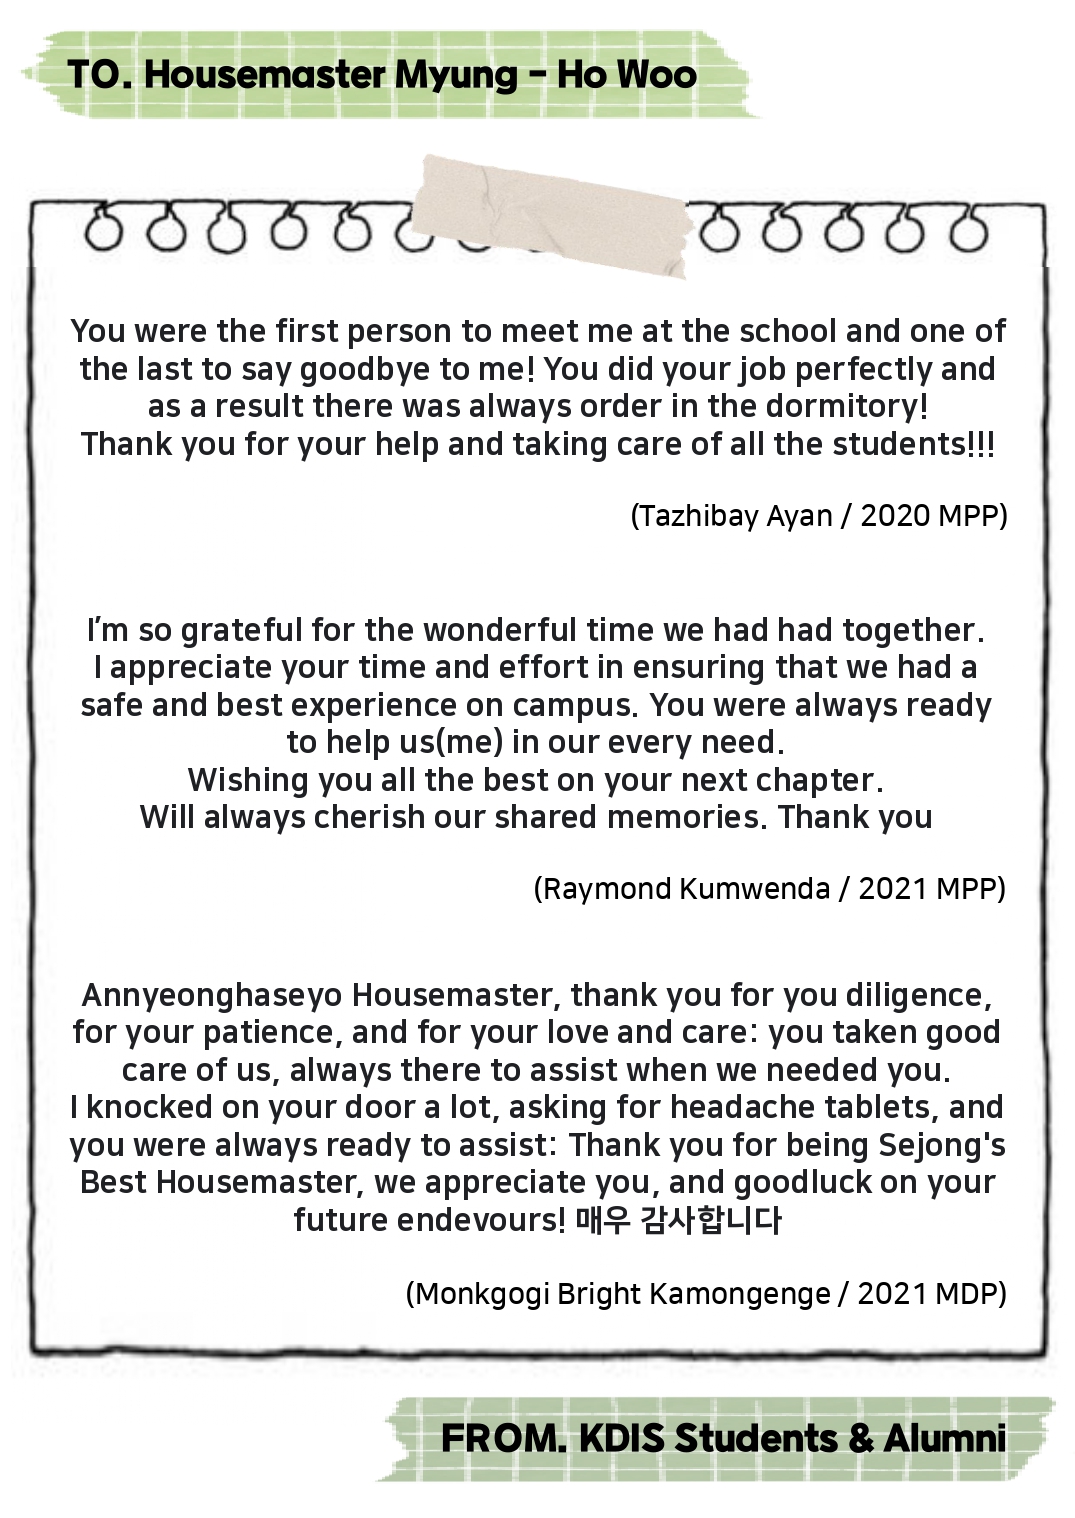 Thank you Housemaster Myung-ho Woo -Messages from KDIS Students and Alumni 사진15